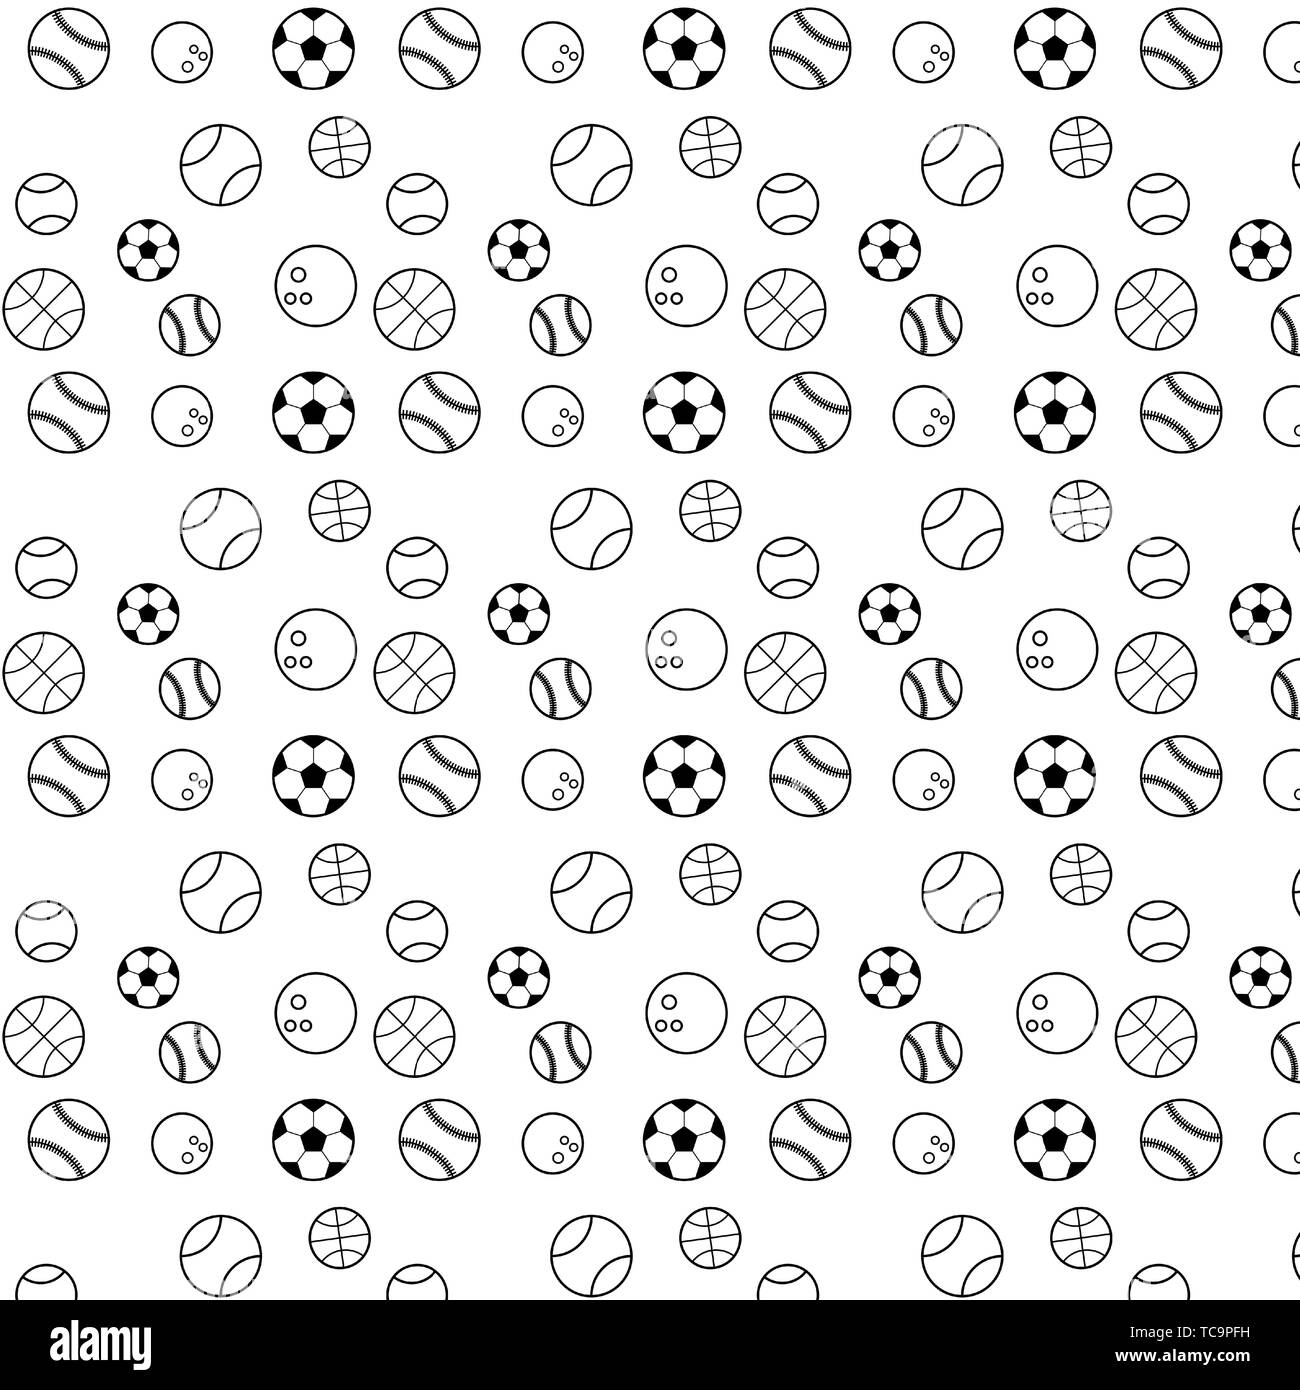 Sport pattern with vintage badges and labels Stock Vector